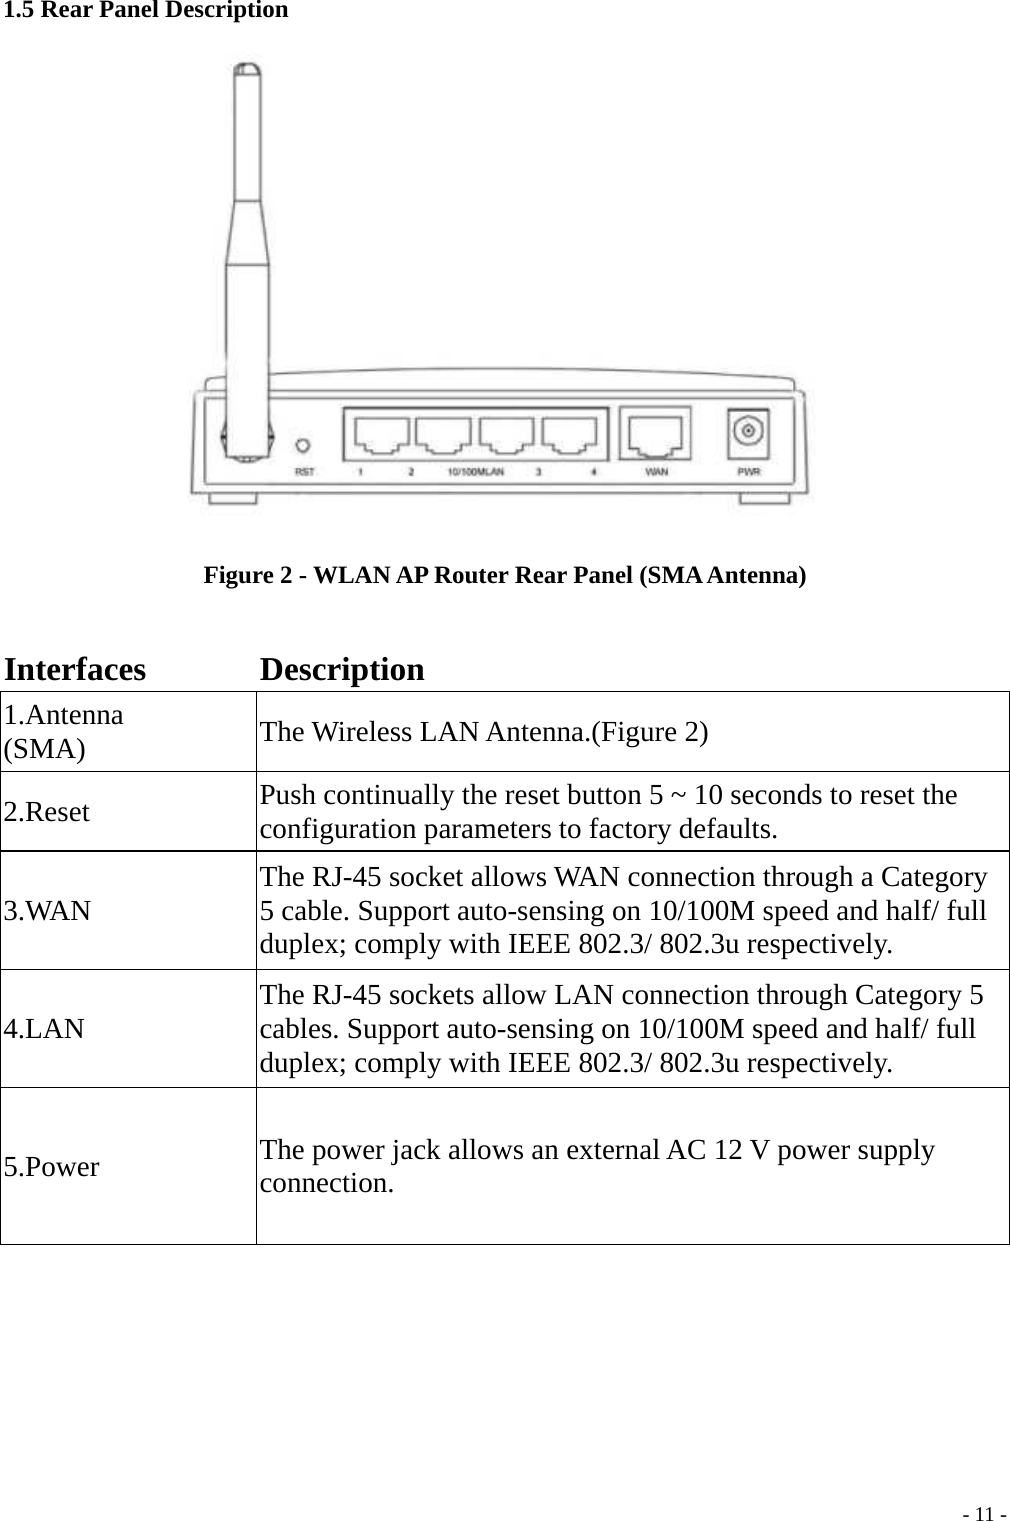 1.5 Rear Panel Description  Figure 2 - WLAN AP Router Rear Panel (SMA Antenna)  Interfaces Description 1.Antenna (SMA)  The Wireless LAN Antenna.(Figure 2) 2.Reset  Push continually the reset button 5 ~ 10 seconds to reset the configuration parameters to factory defaults. 3.WAN  The RJ-45 socket allows WAN connection through a Category 5 cable. Support auto-sensing on 10/100M speed and half/ full duplex; comply with IEEE 802.3/ 802.3u respectively. 4.LAN  The RJ-45 sockets allow LAN connection through Category 5 cables. Support auto-sensing on 10/100M speed and half/ full duplex; comply with IEEE 802.3/ 802.3u respectively. 5.Power  The power jack allows an external AC 12 V power supply connection.   - 11 -